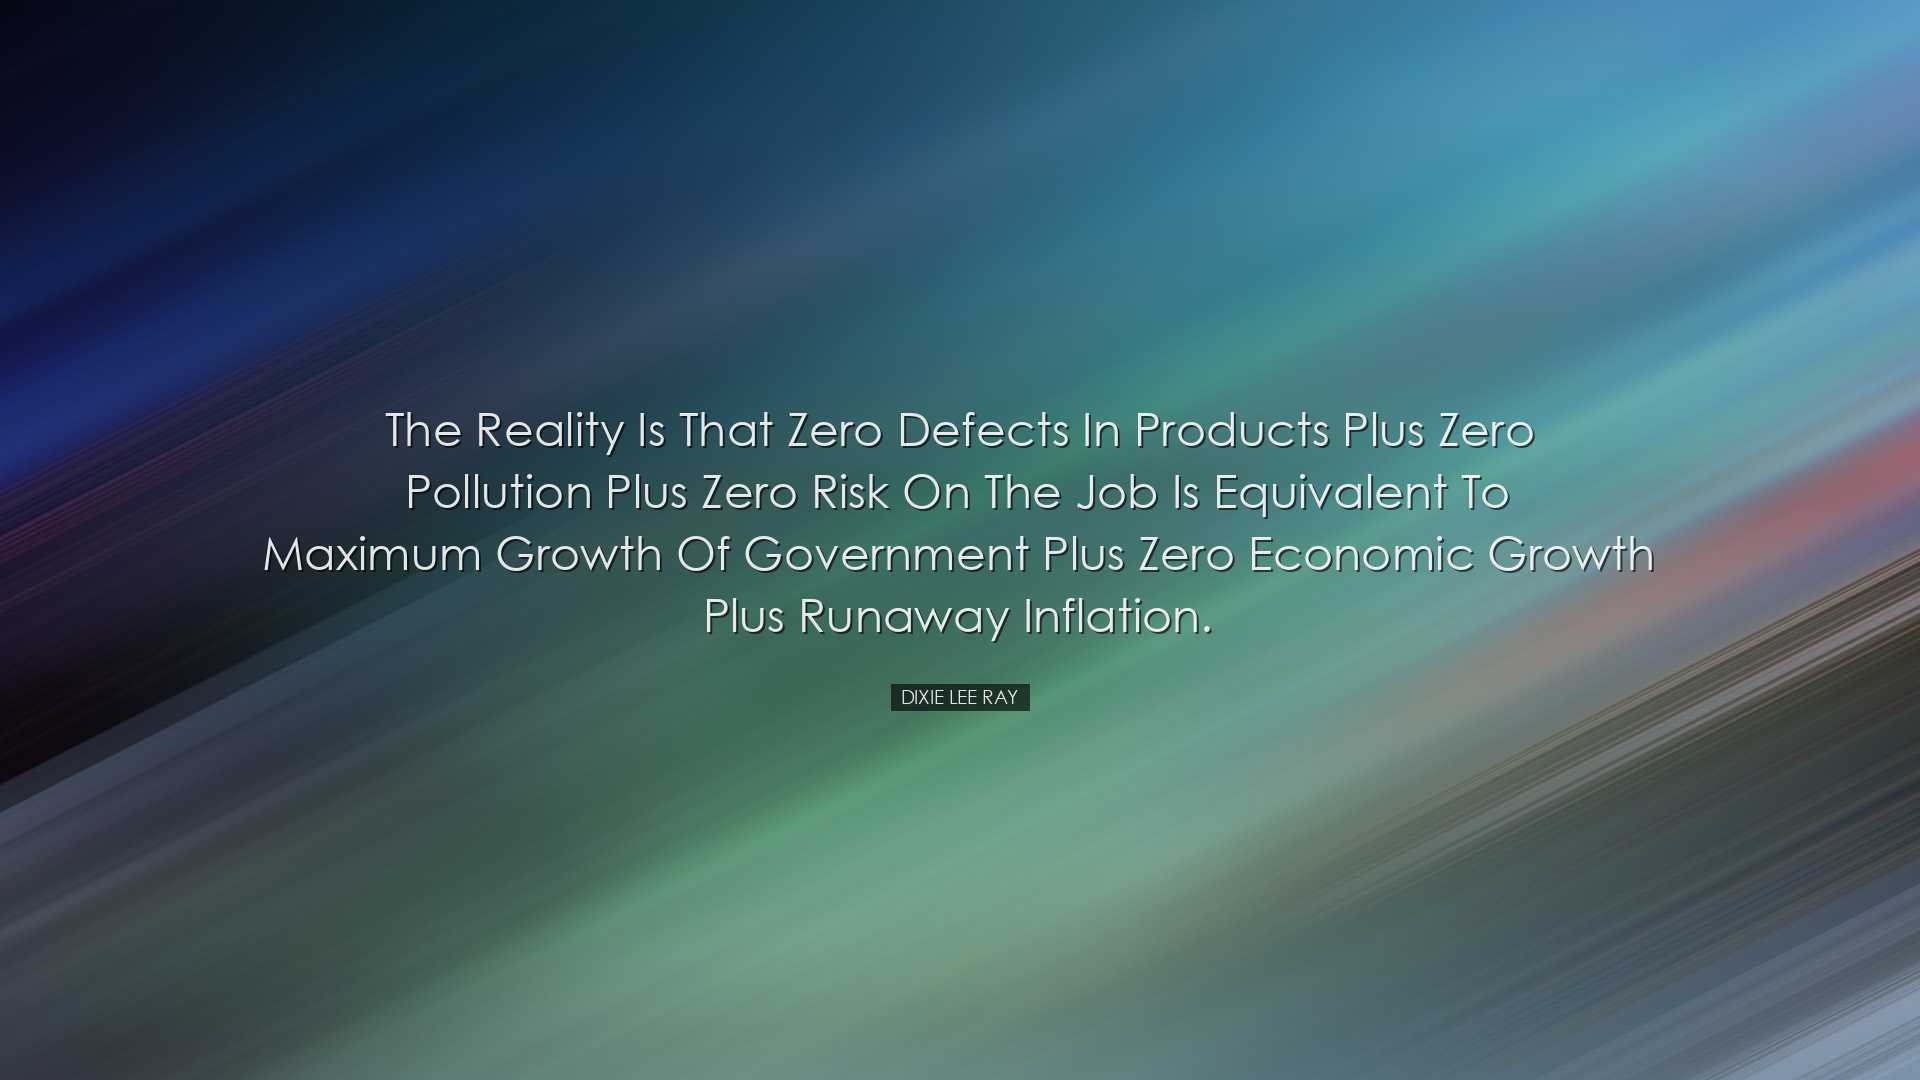 The reality is that zero defects in products plus zero pollution p